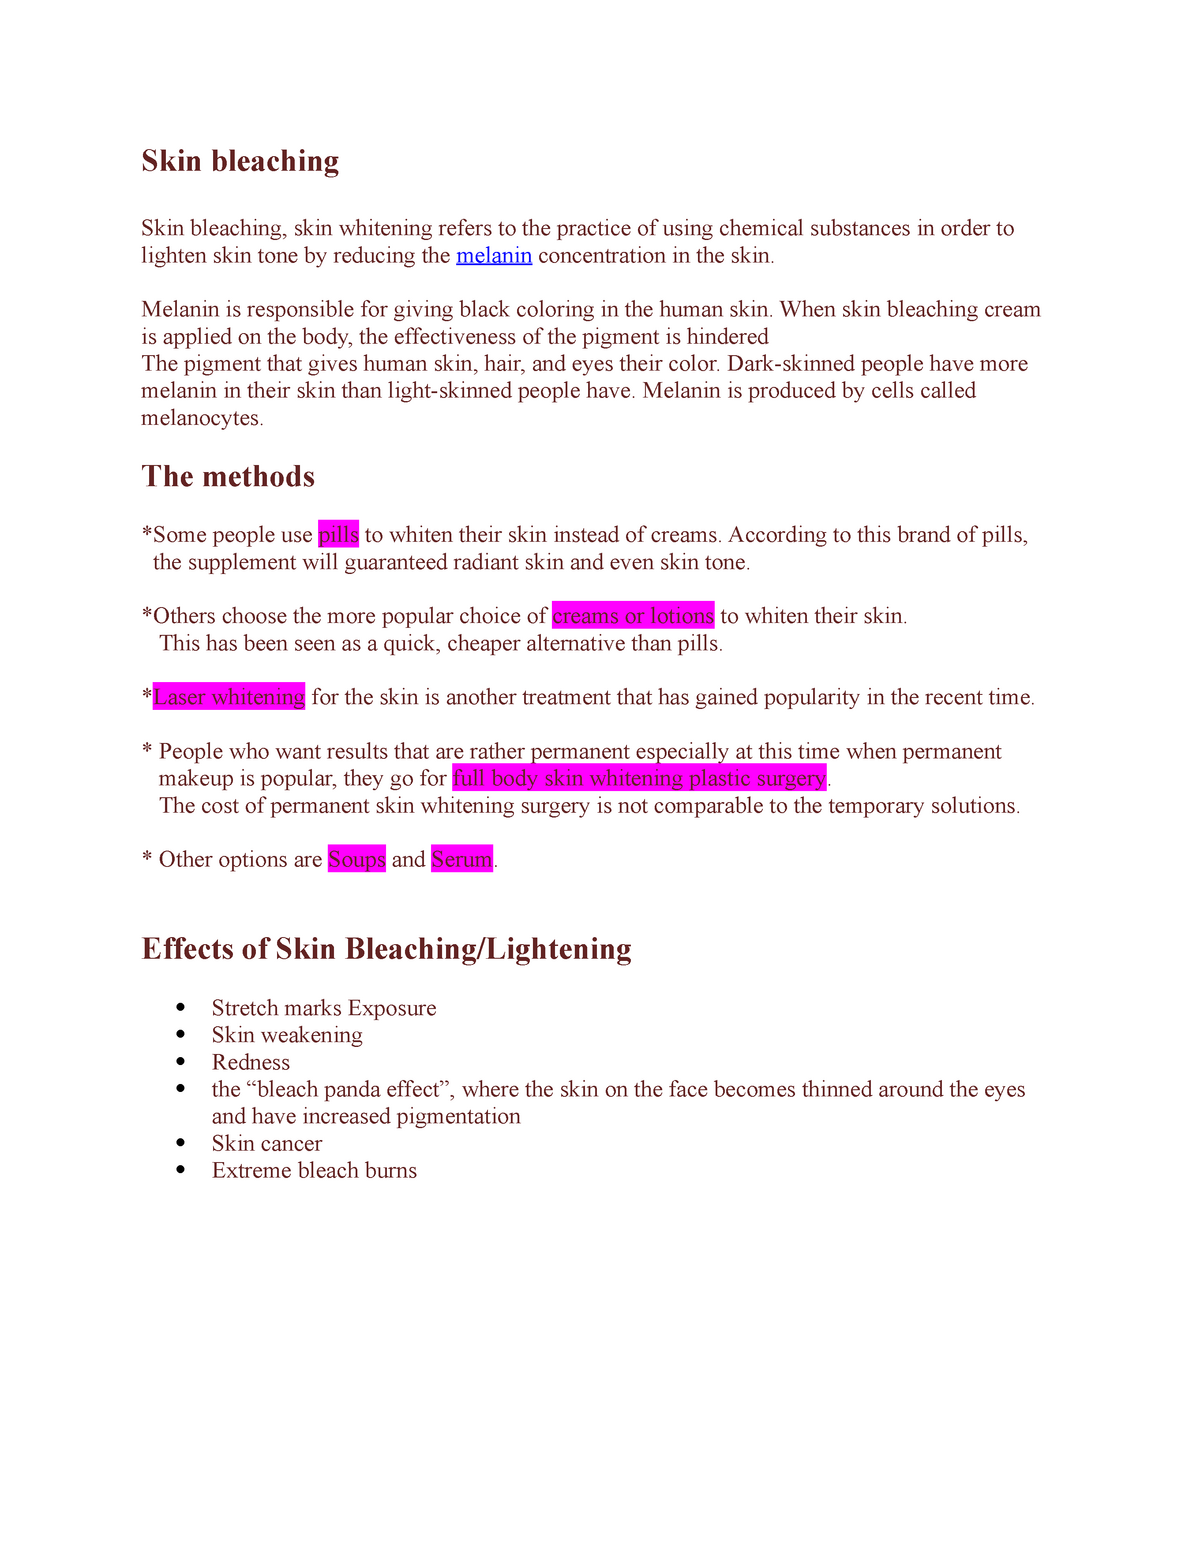 essay about skin bleaching